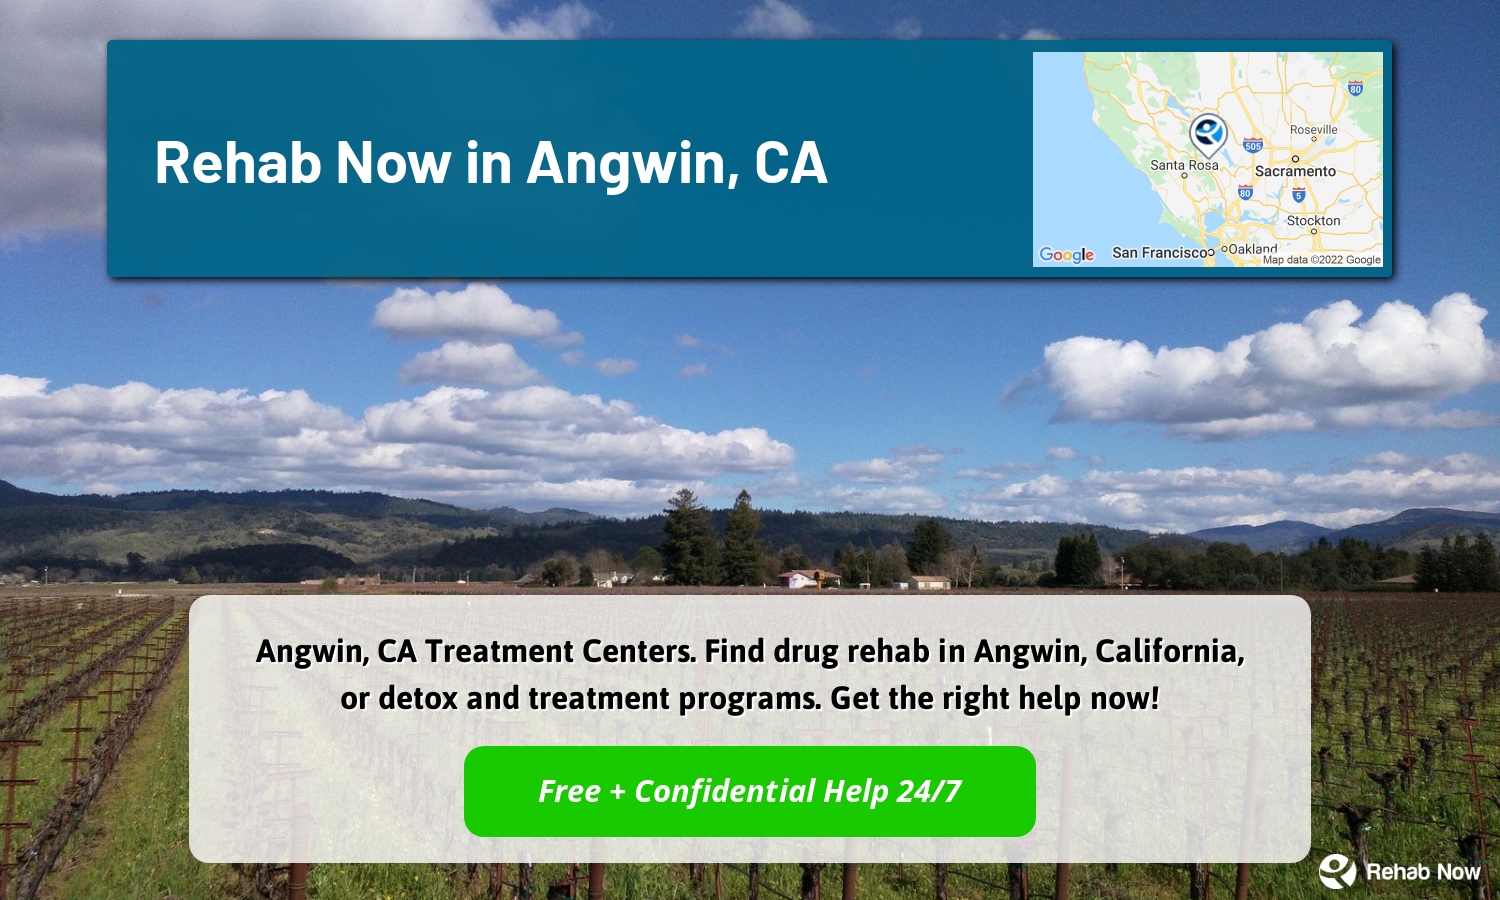 Angwin, CA Treatment Centers. Find drug rehab in Angwin, California, or detox and treatment programs. Get the right help now!